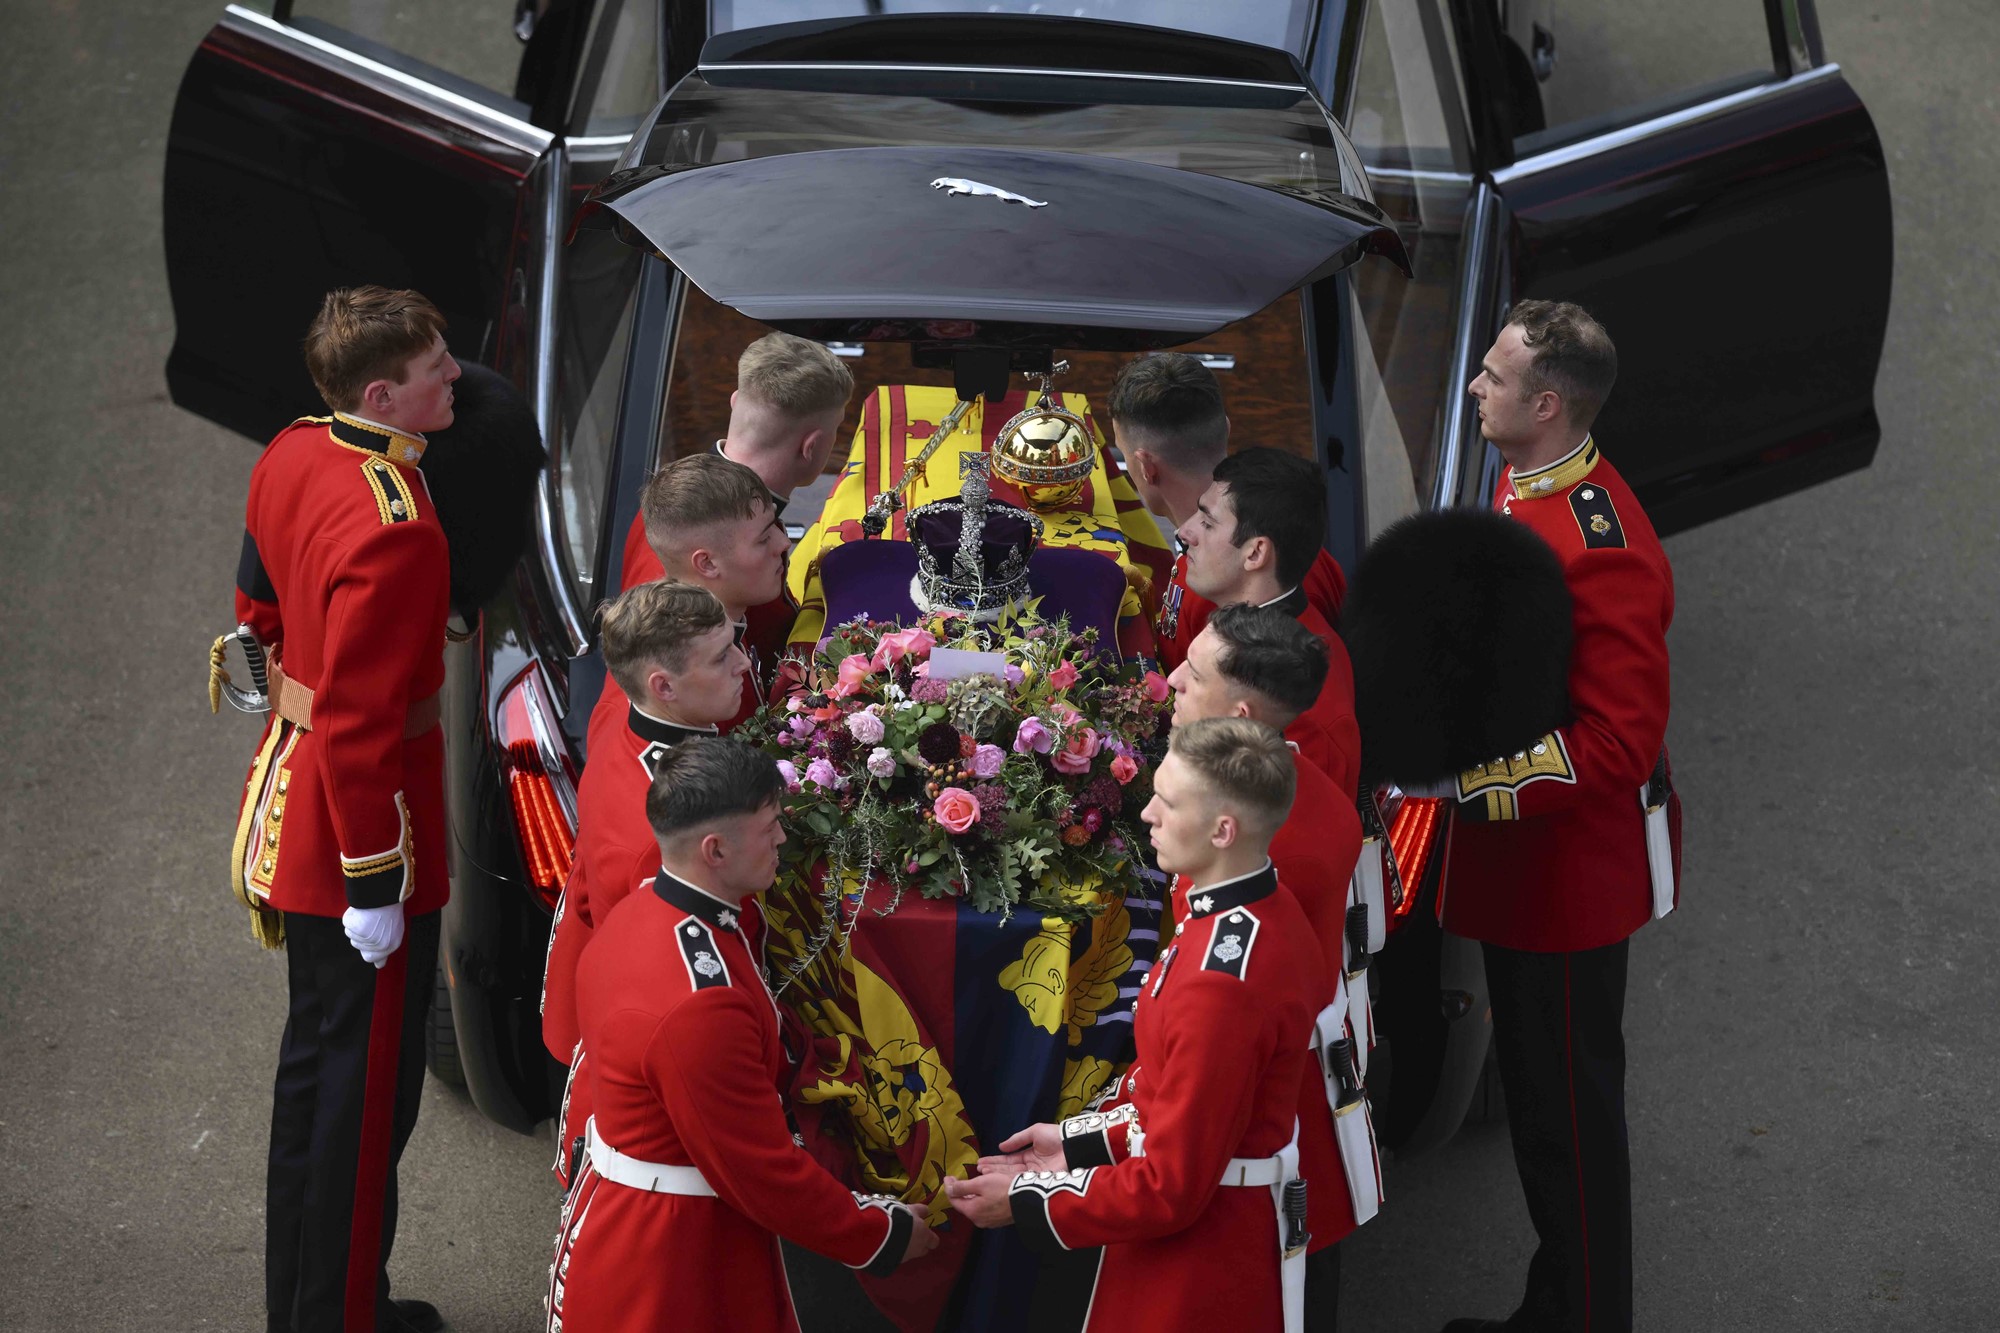 Pallbearers move the Queen's coffin into a car